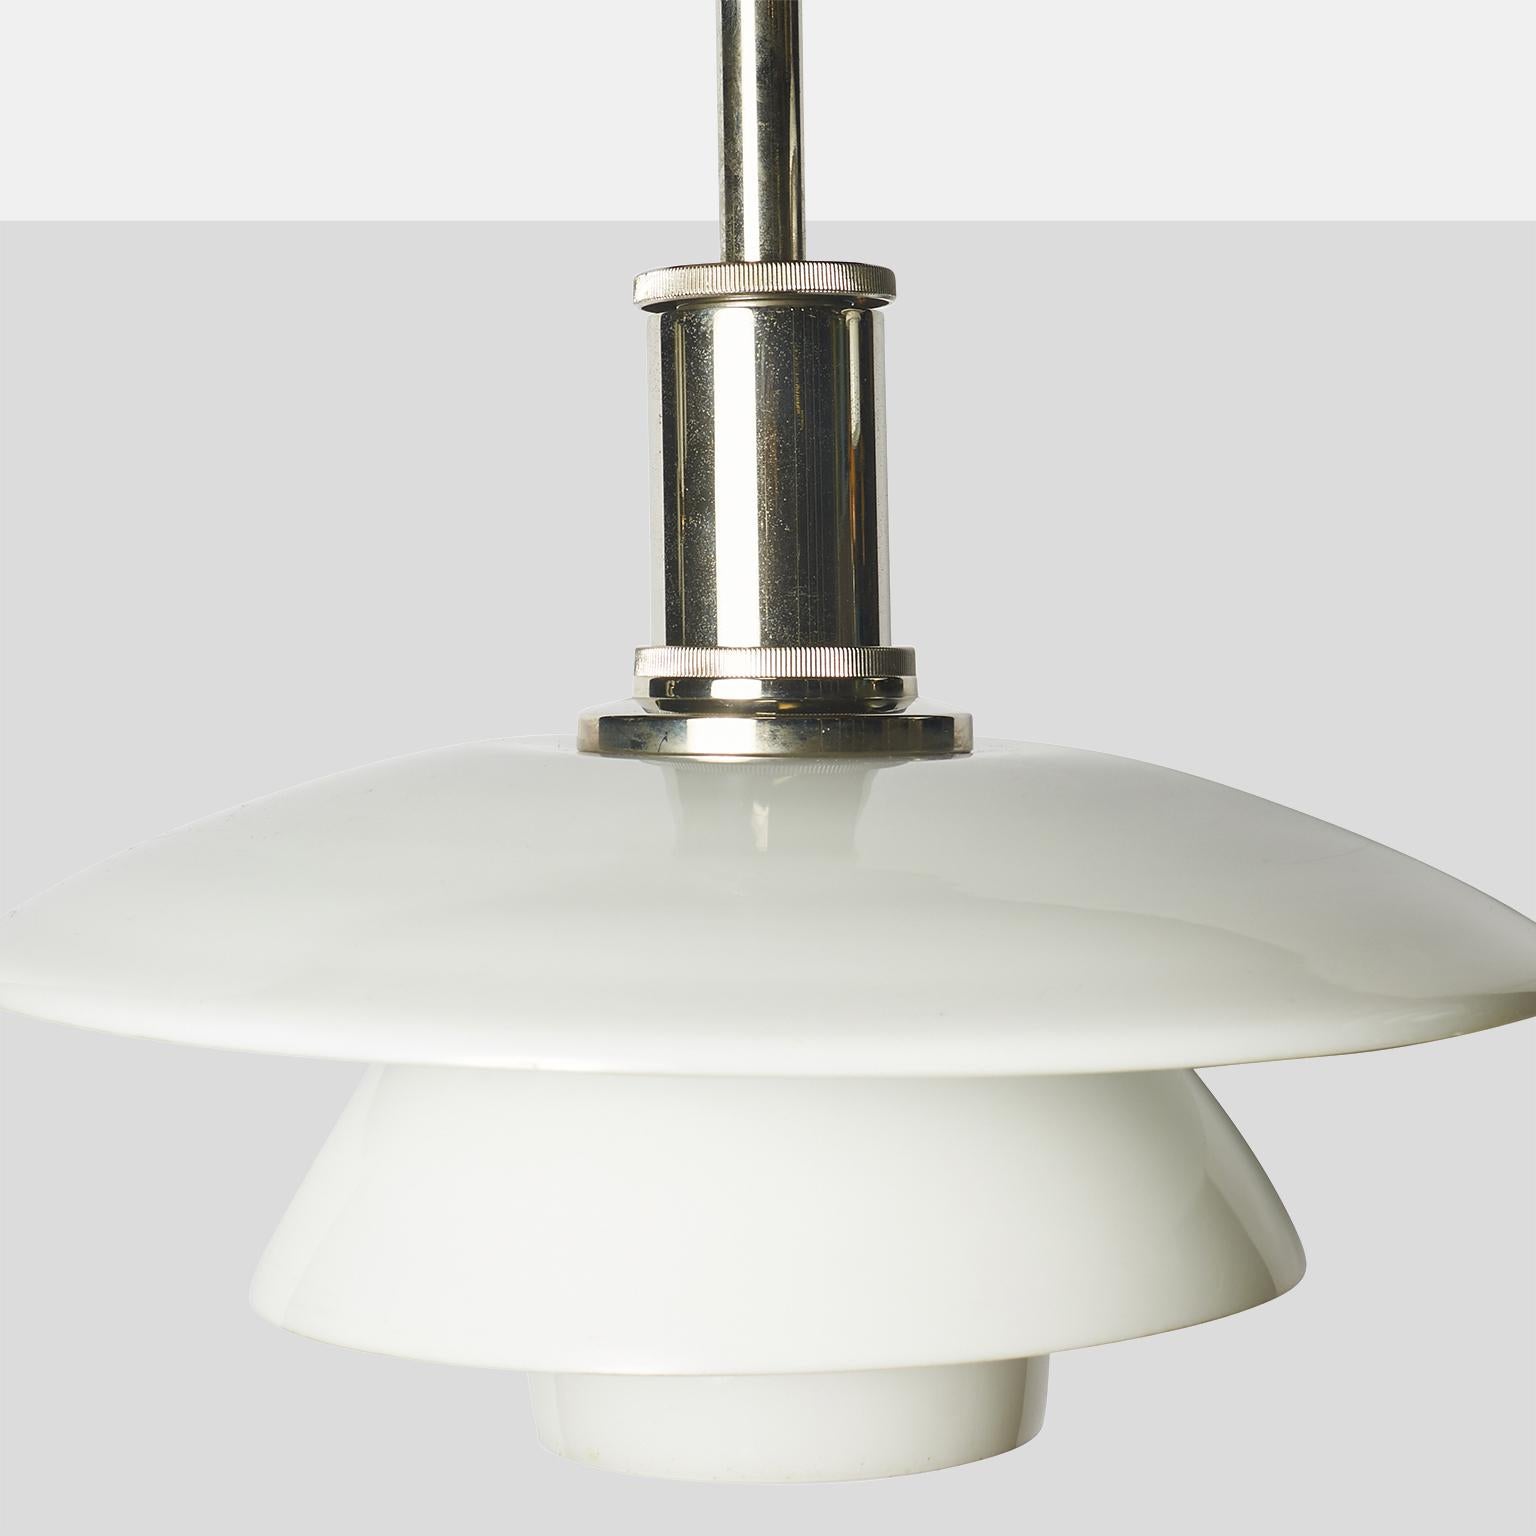 Pendant lamp for Louis Poulsen - 4.5/4 with upper aluminum shade and 2 Lower glass rings.